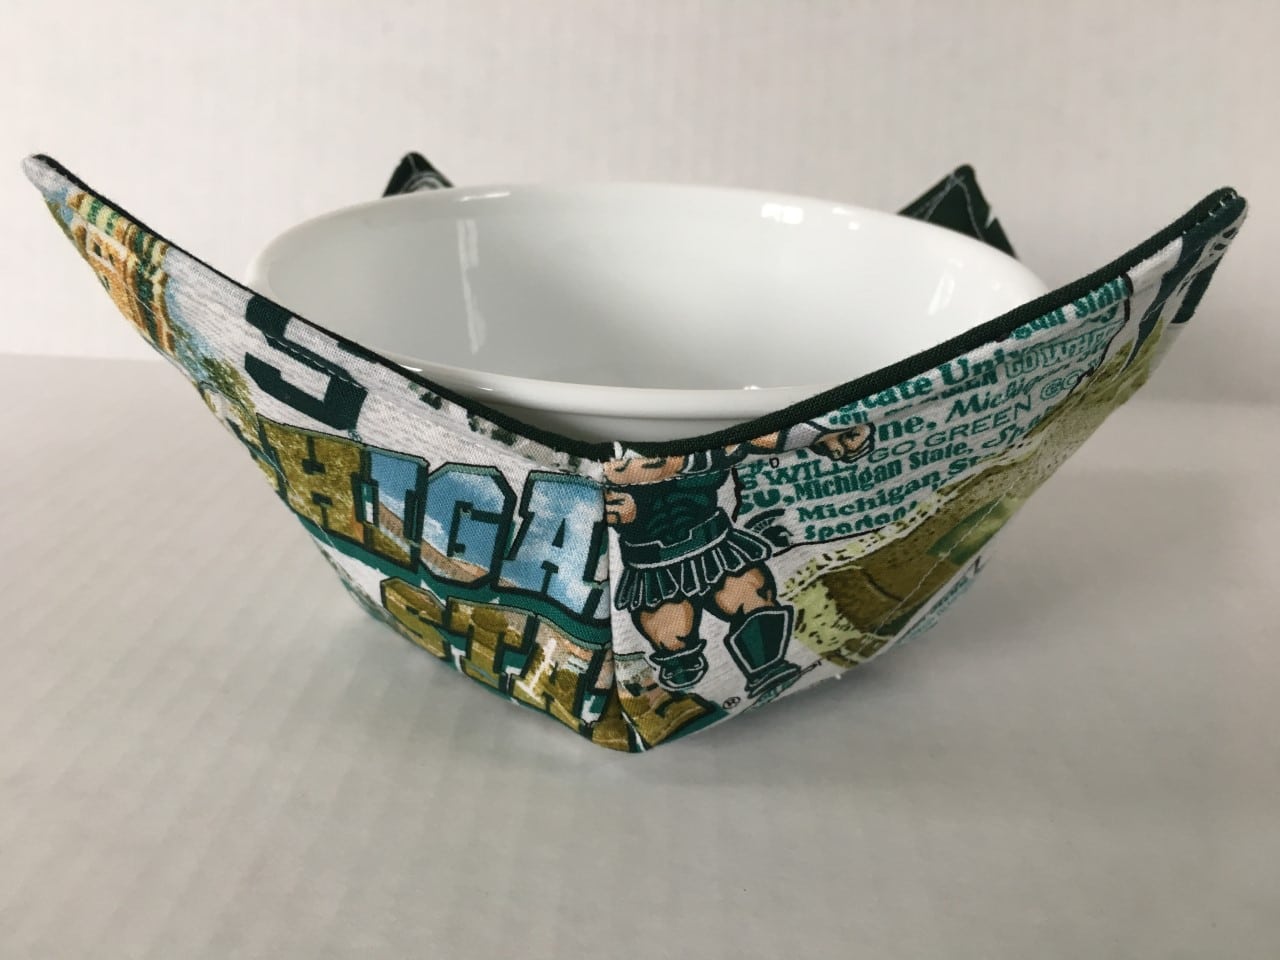 Cherry Blossoms Microwave Bowl Holder Cozy Hot Pad » Made In Michigan